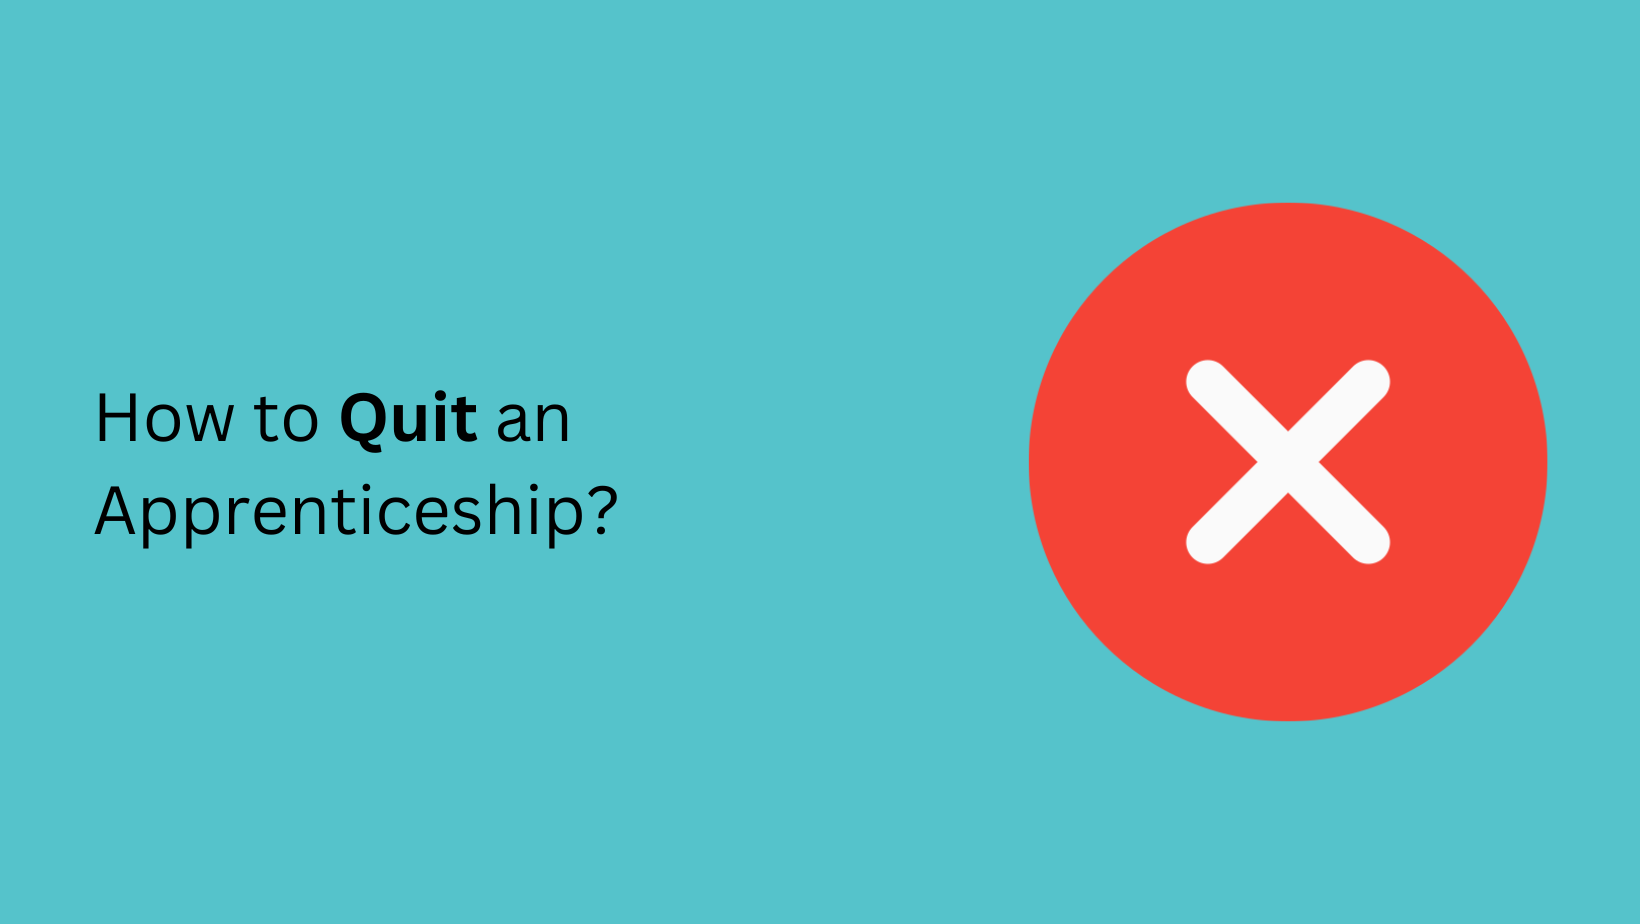 How to Quit an Apprenticeship